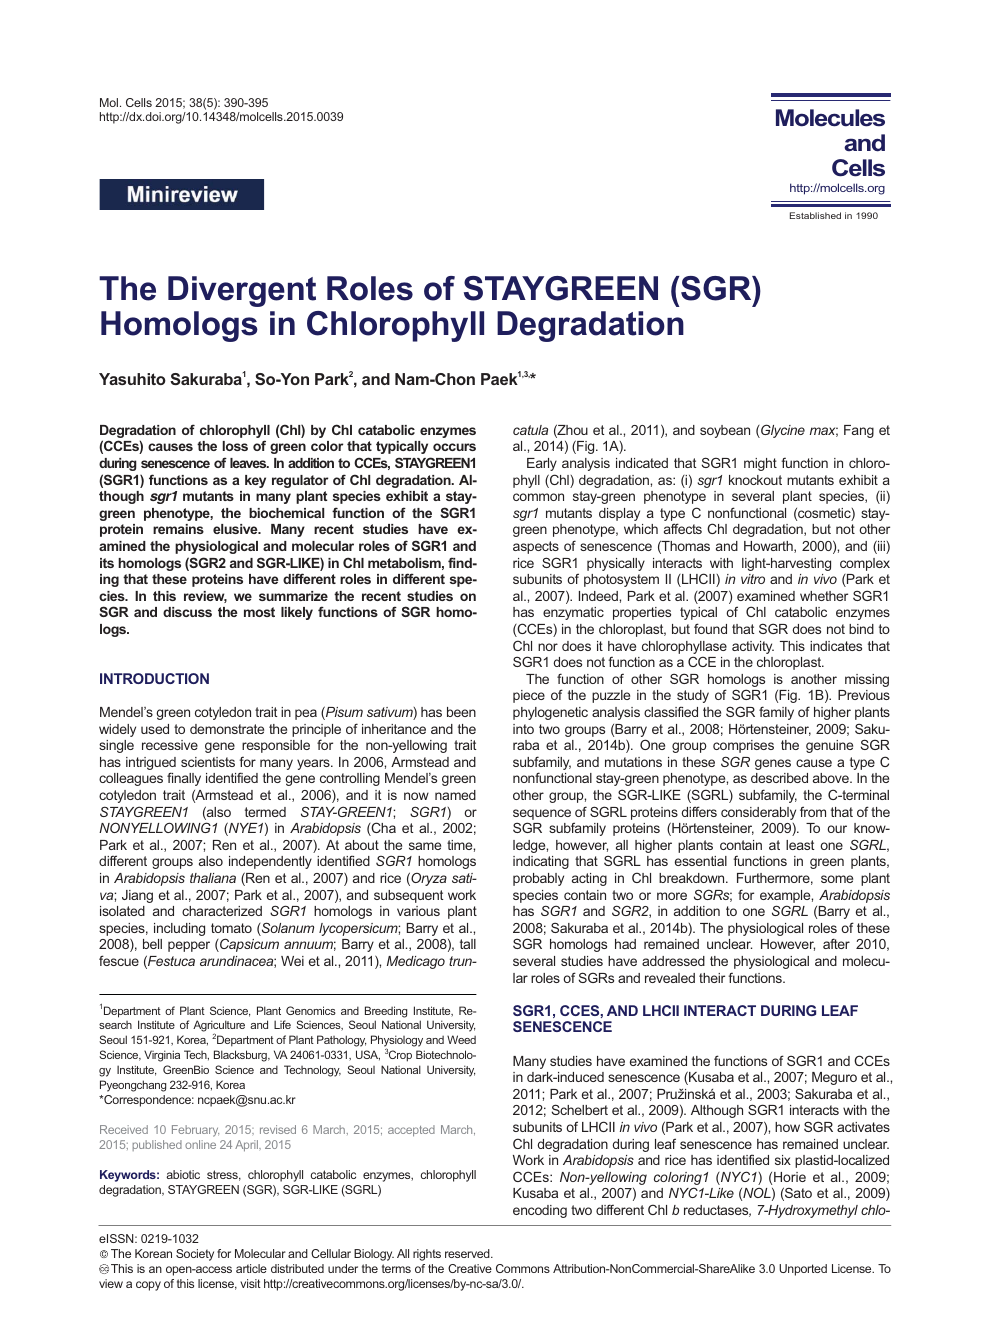 The Divergent Roles Of Staygreen Sgr Homologs In Chlorophyll Degradation Topic Of Research Paper In Biological Sciences Download Scholarly Article Pdf And Read For Free On Cyberleninka Open Science Hub